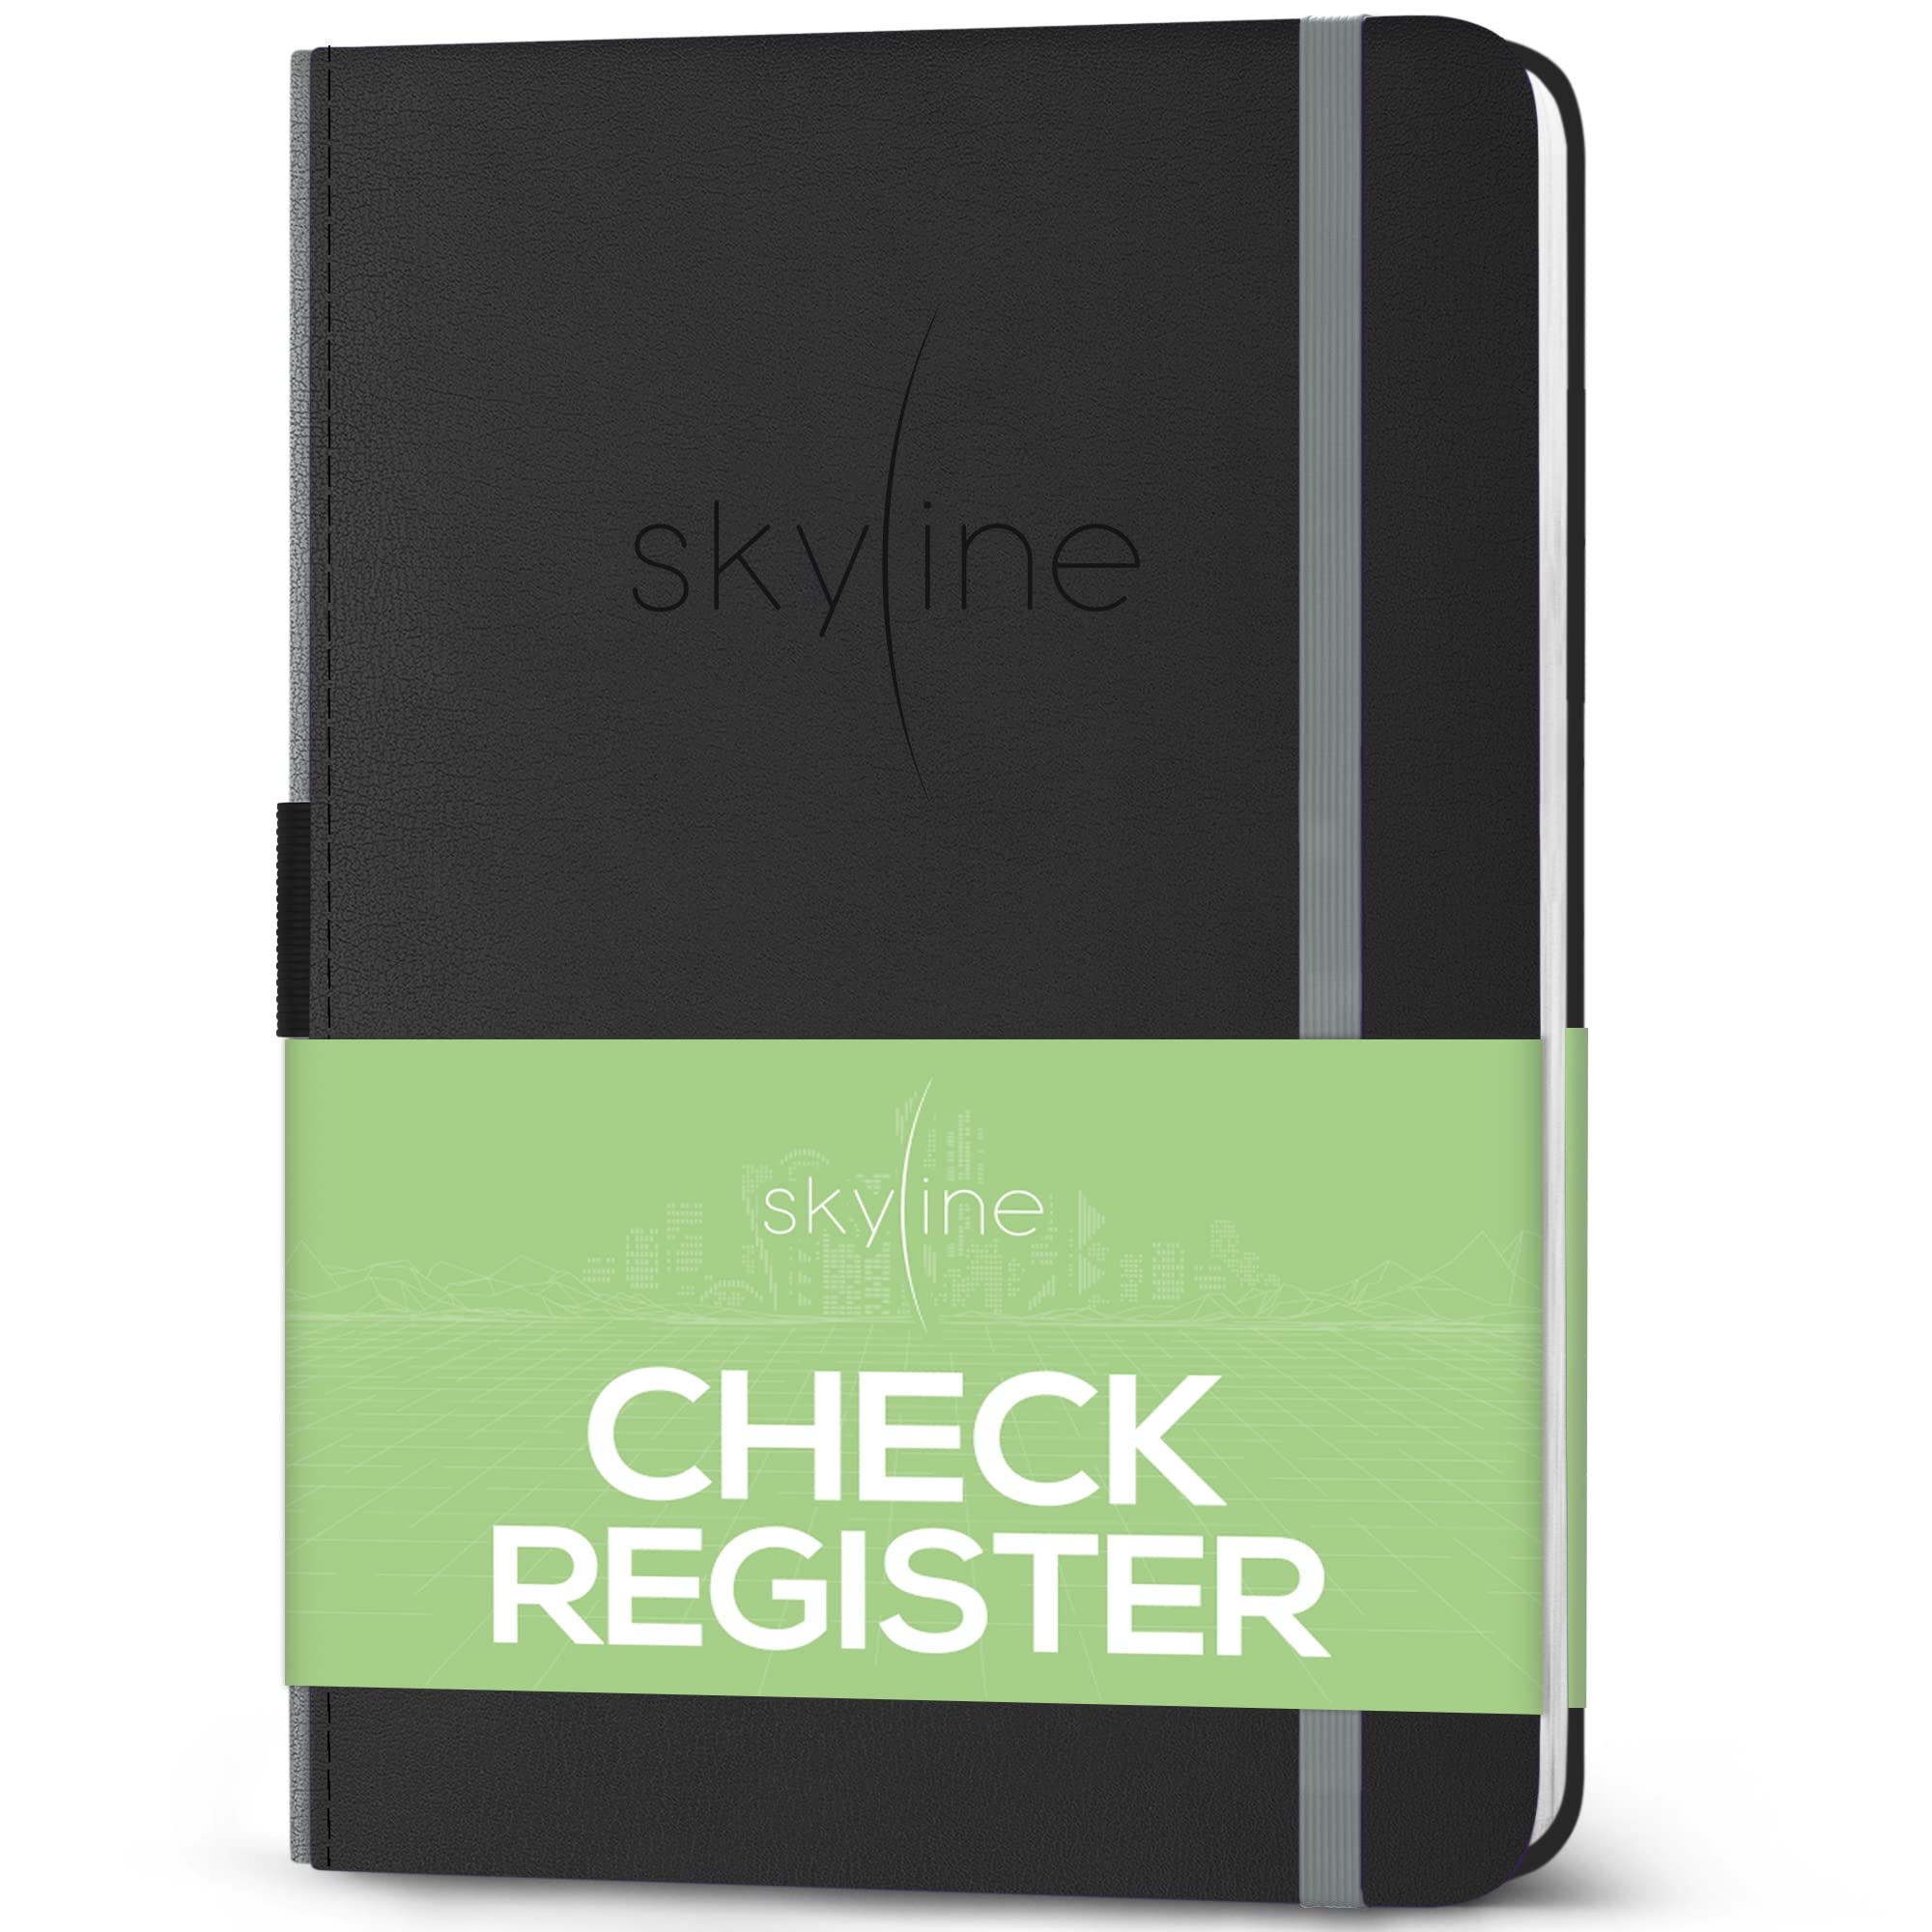 Skyline check Register - Accounting Ledger Log Book for Income & Expenses - Transaction checkbook for Small Business - checking 